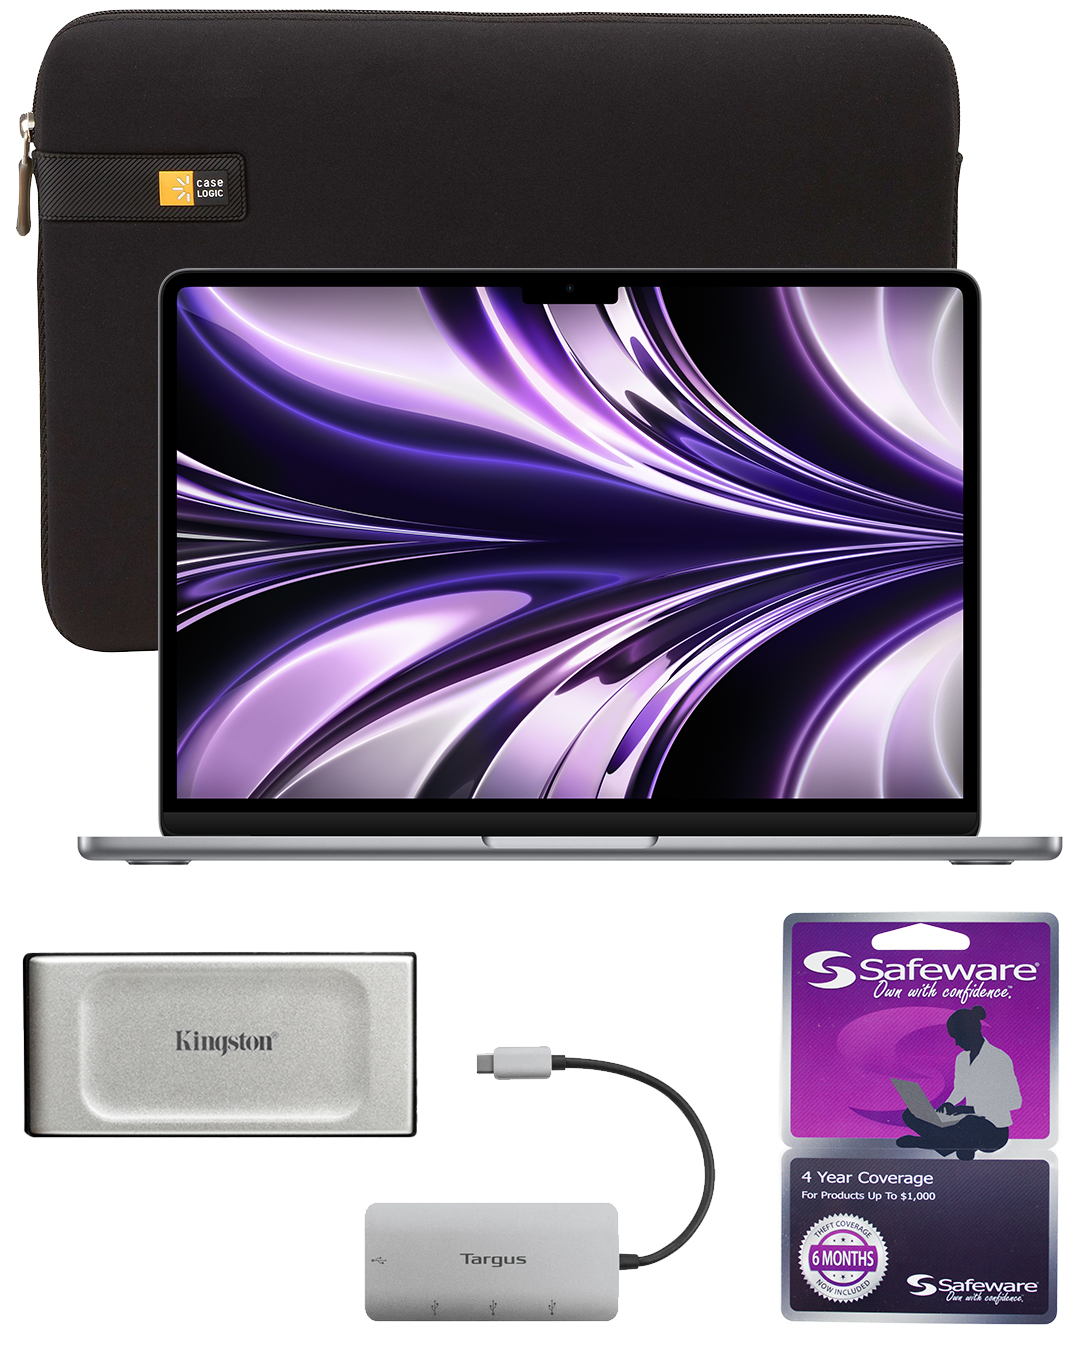 13-inch MacBook Air with Safeware 4 year warranty, 13-inch protective sleeve, 1TB external hard drive with USB-C Adapter and 4-port USB 3.0 hub